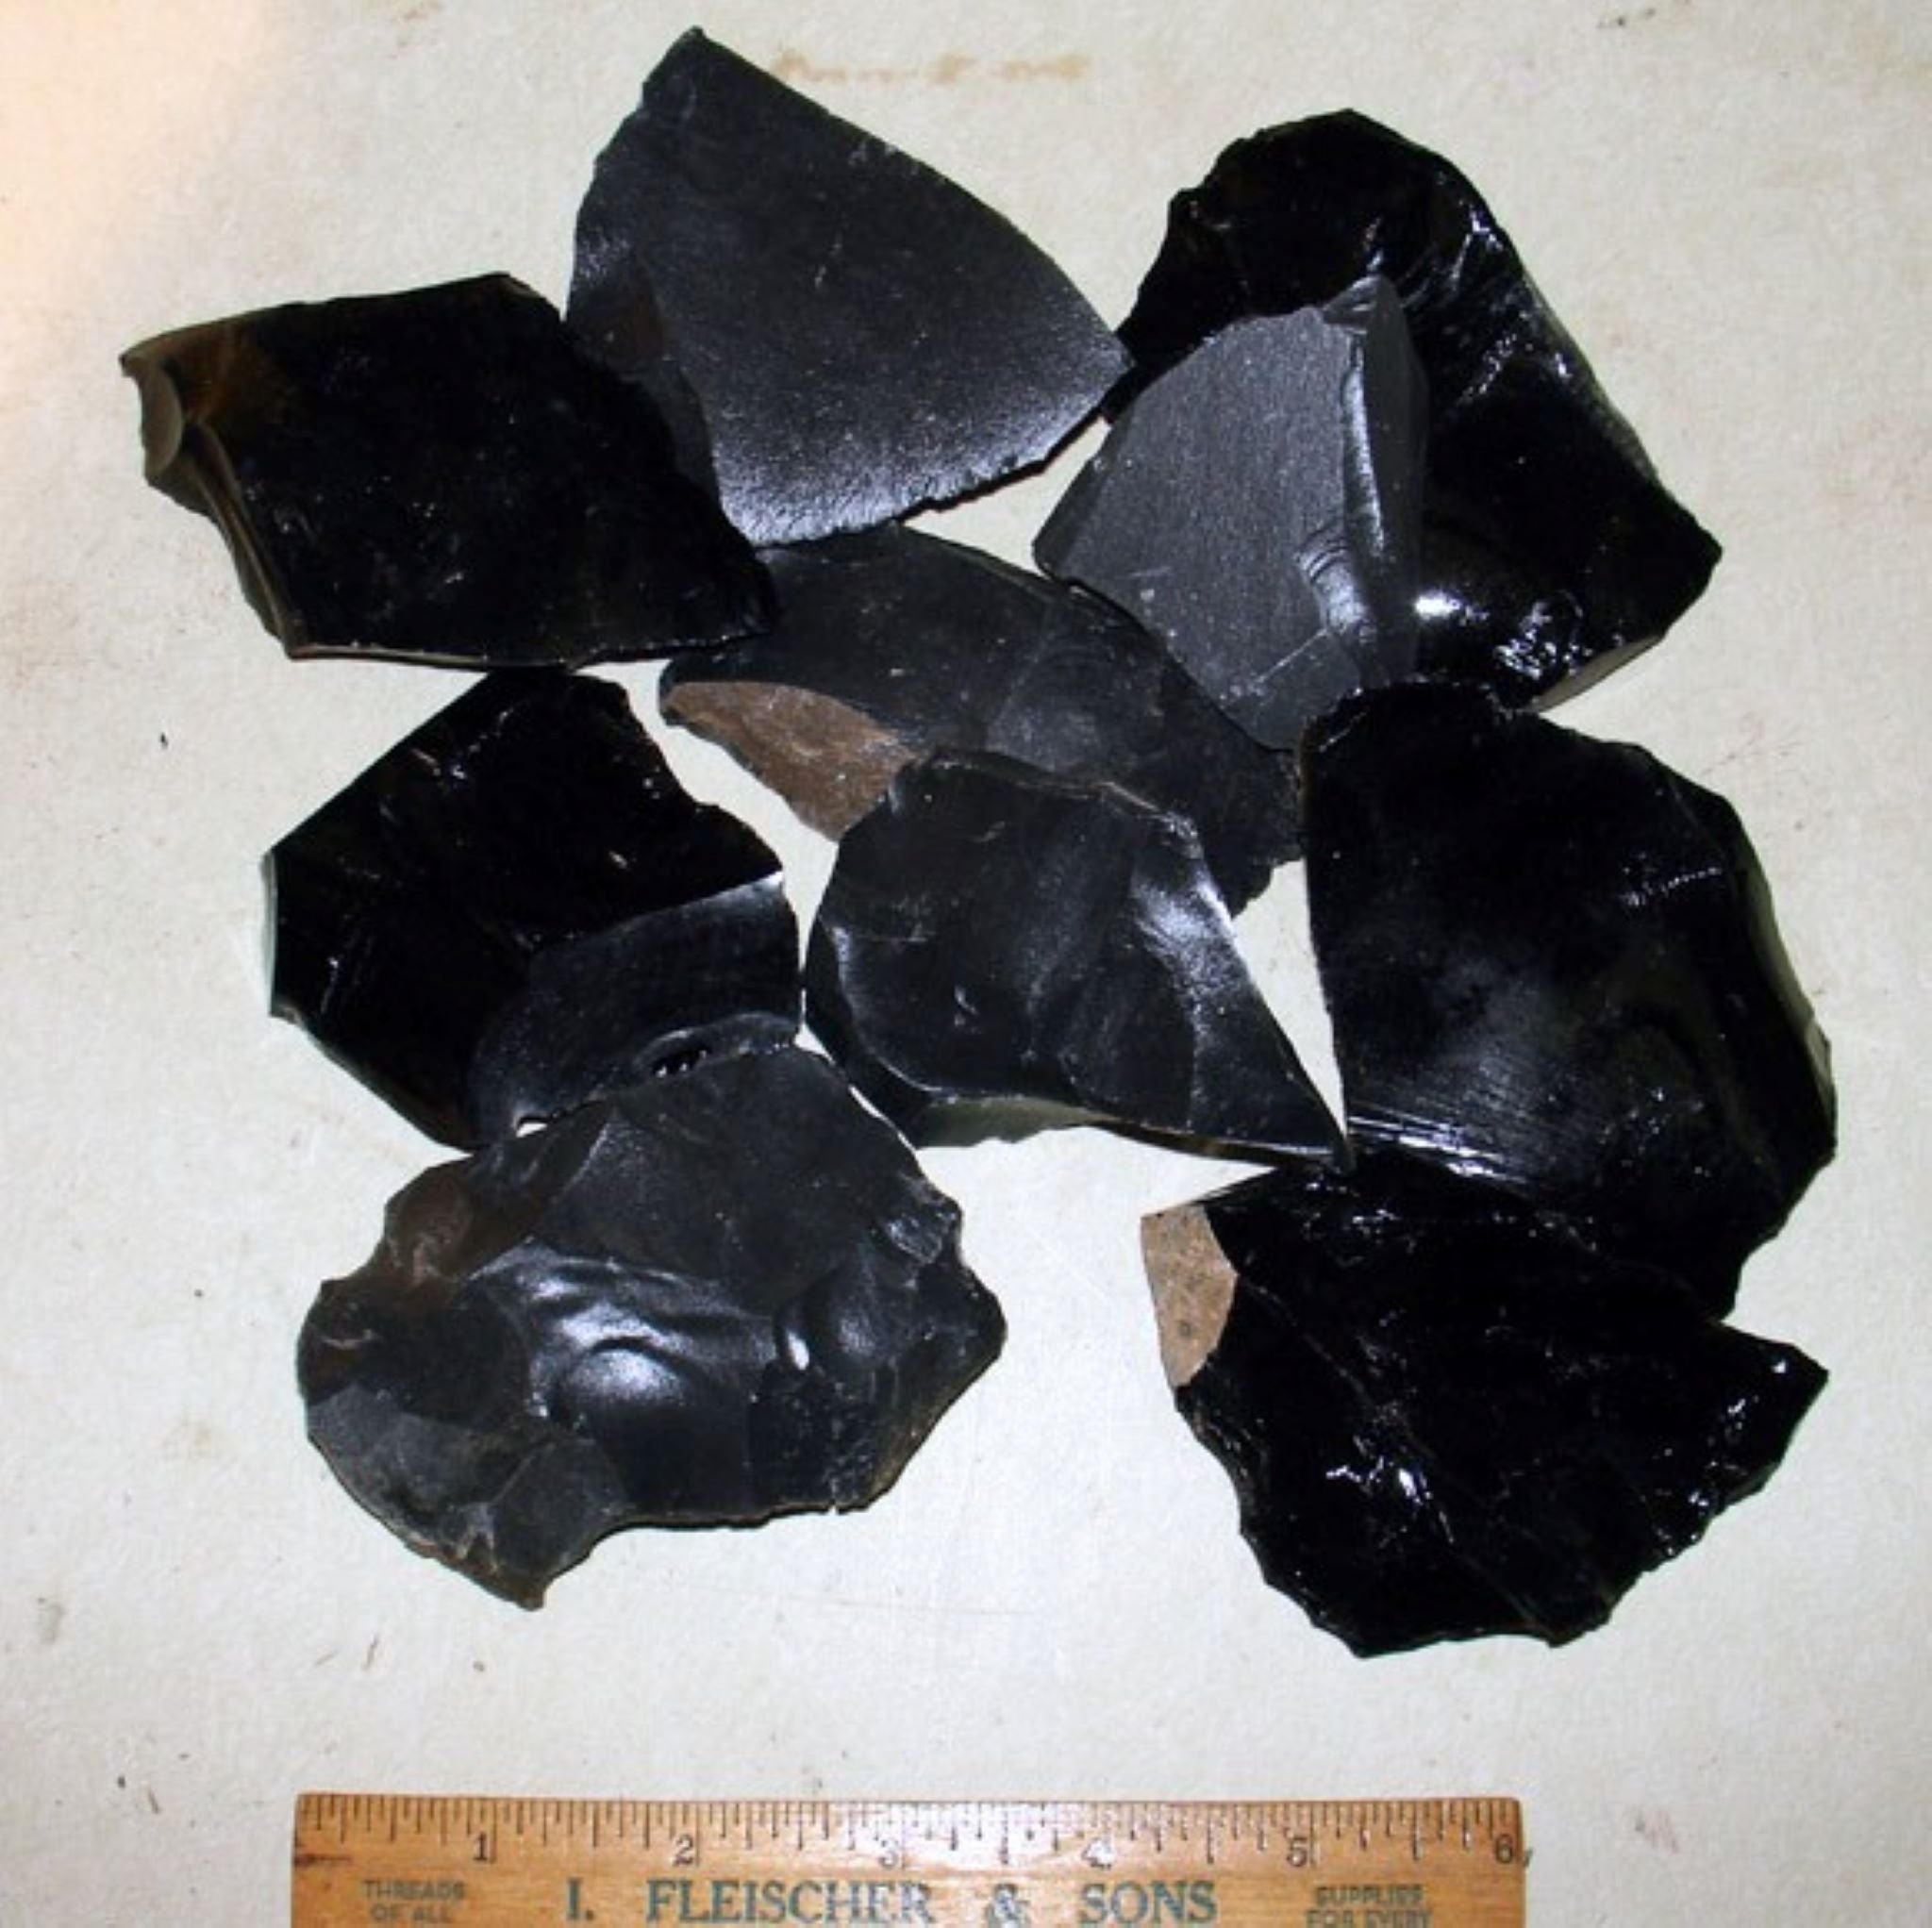 Black obsidian & dacite small spalls with ruler